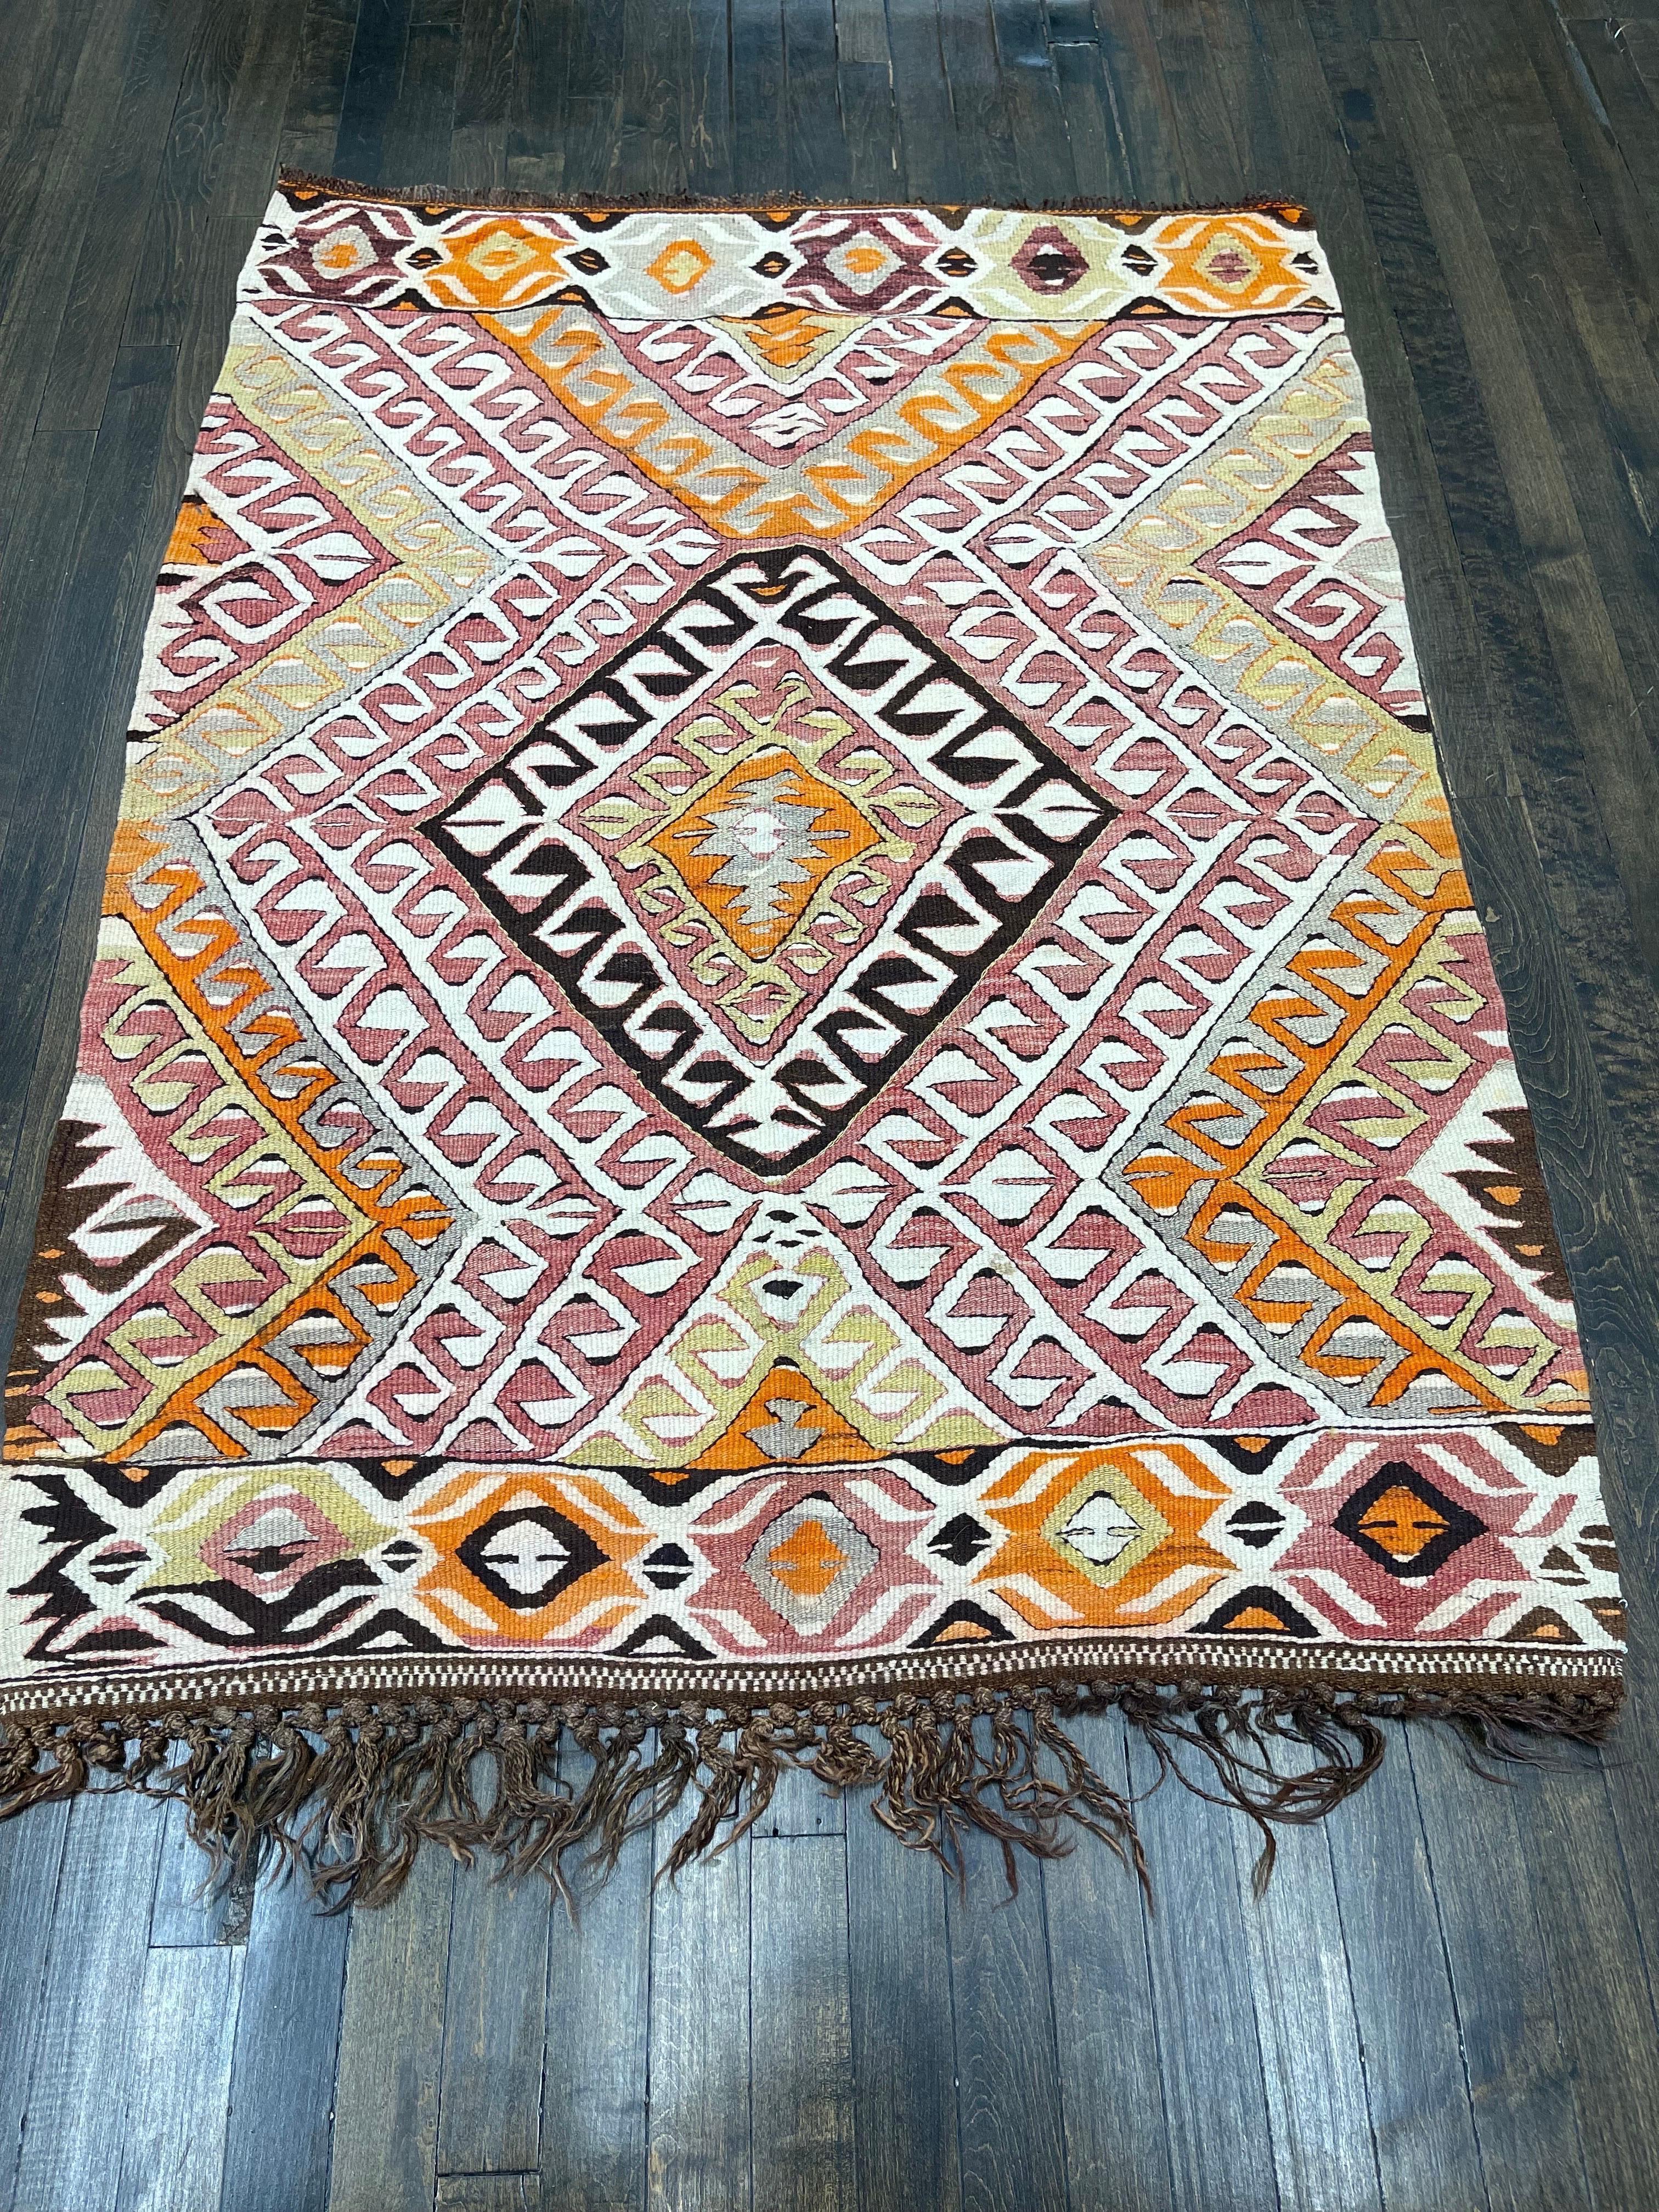 Stunning antique Turkish flat weave possibly made in Konya. Featuring clear crispy colors in orange red, and many shades of blue,brown,yellow,green and ivory. This kilm is perfect for wall hanging (a velcro strip has been sewn in across the width of